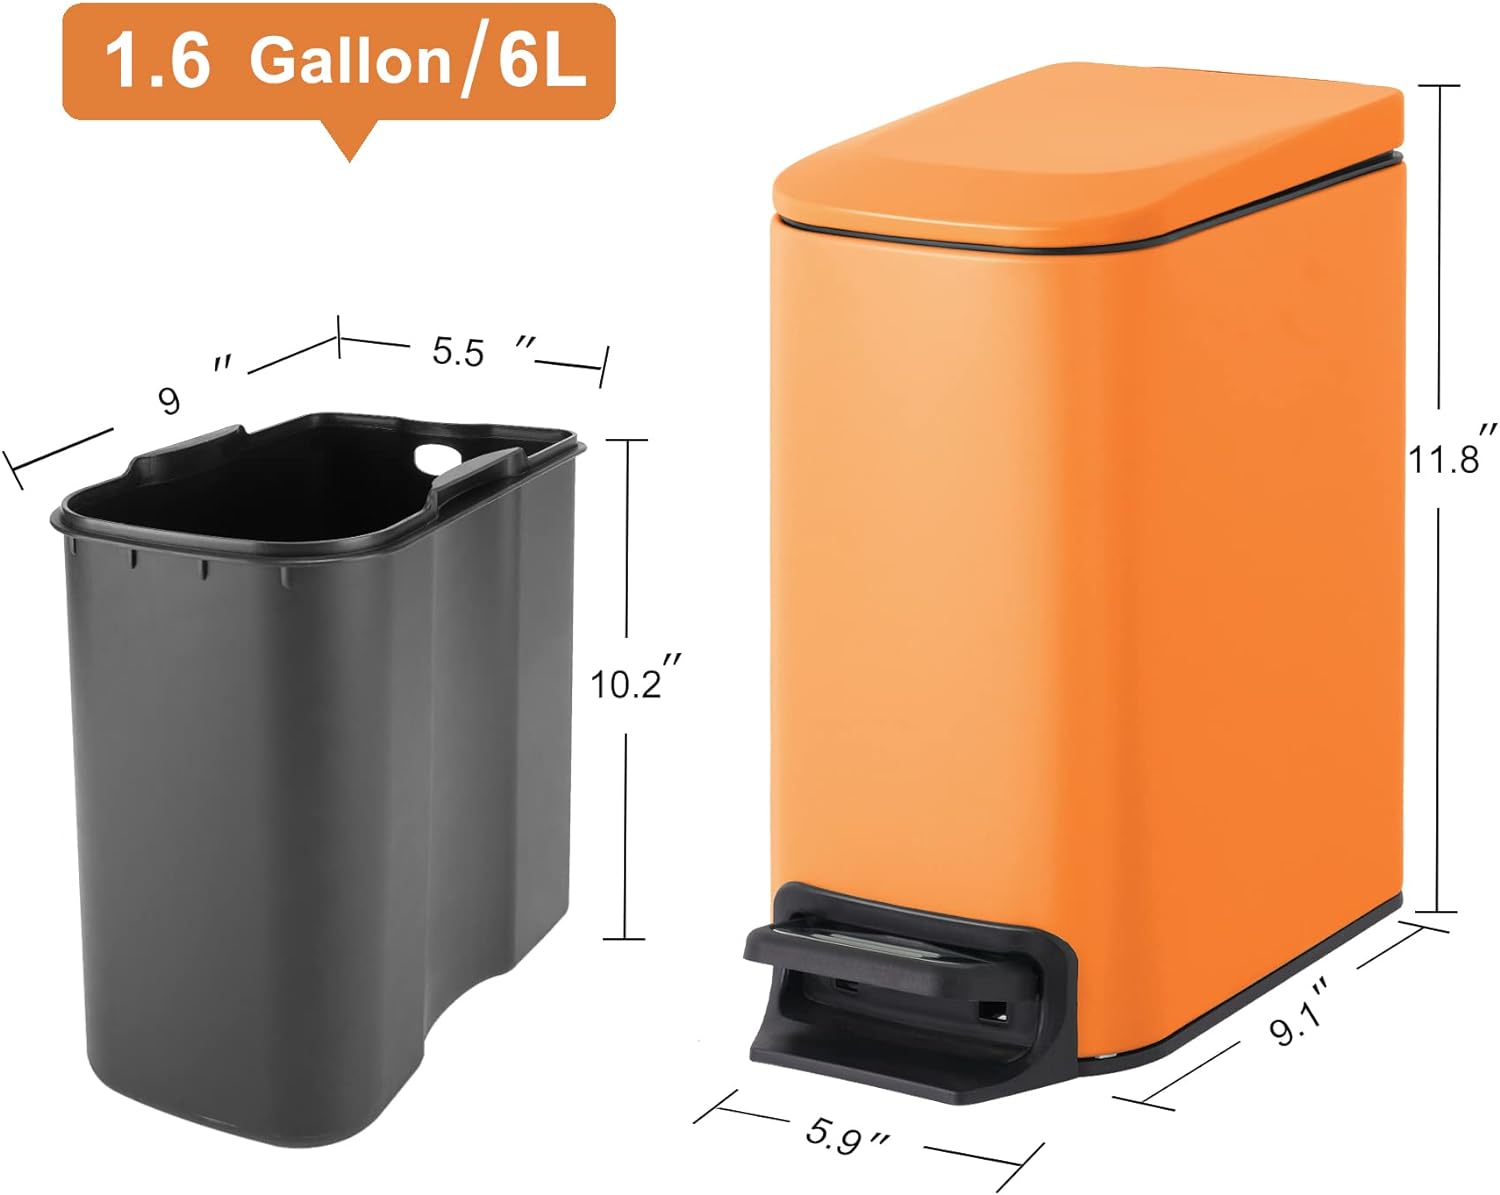 https://bigbigmart.com/wp-content/uploads/2023/10/Cesun-Small-Bathroom-Trash-Can-with-Lid-Soft-Close-Step-Pedal-6-Liter-1.6-Gallon-Stainless-Steel-Garbage-Can-with-Removable-Inner-Bucket-Anti-Fingerprint-Finish-Matt-Orange5.jpg